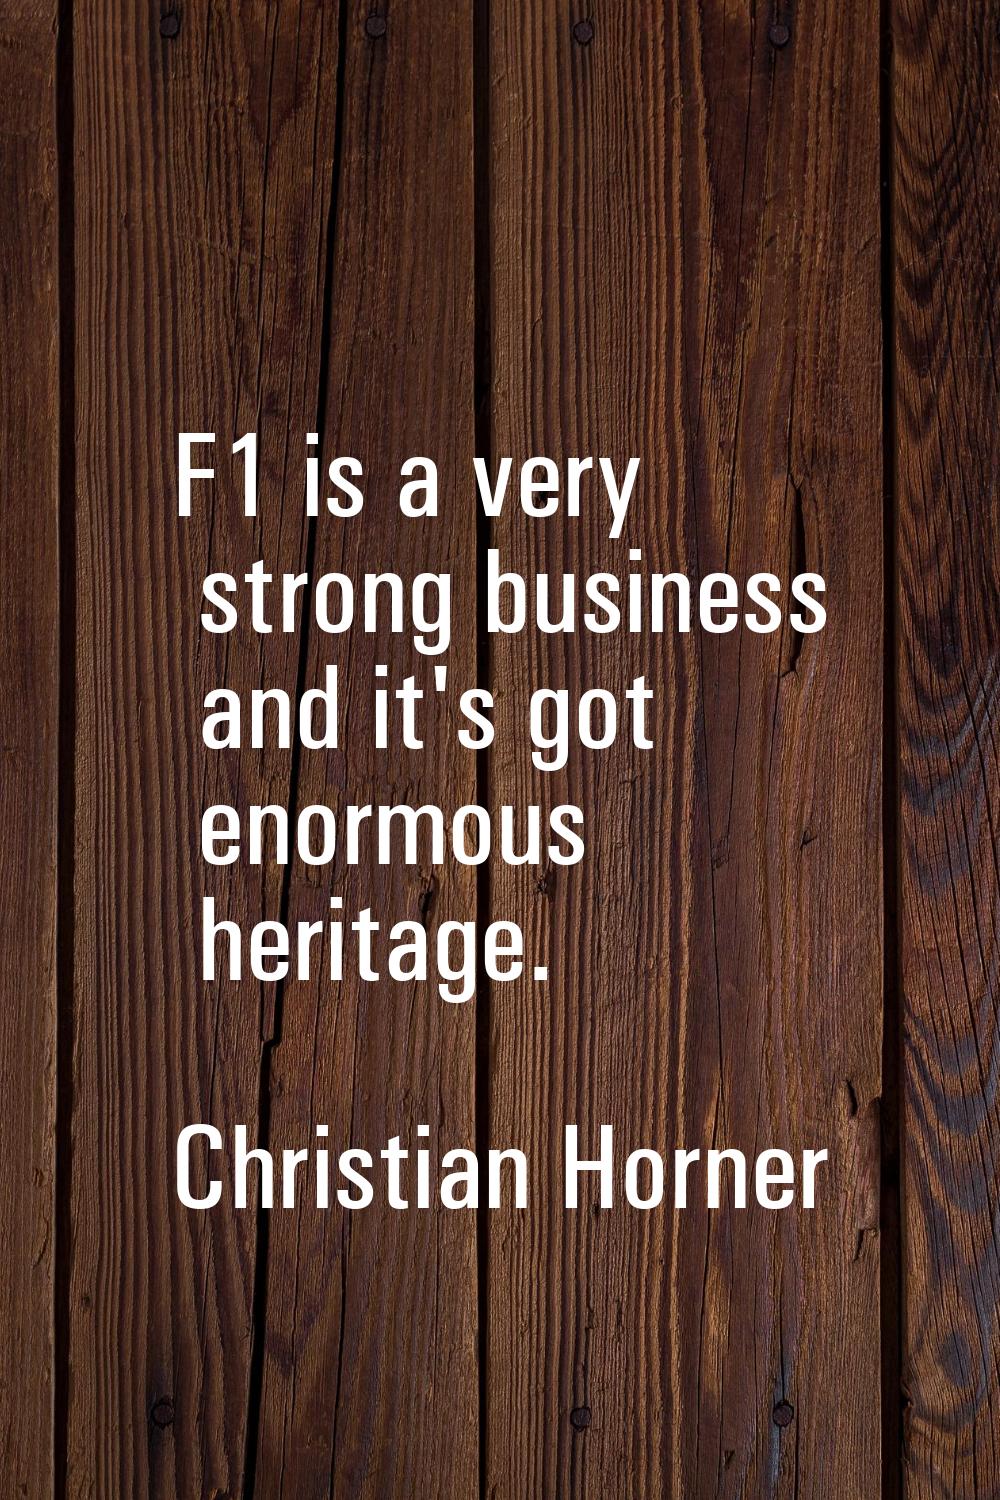 F1 is a very strong business and it's got enormous heritage.